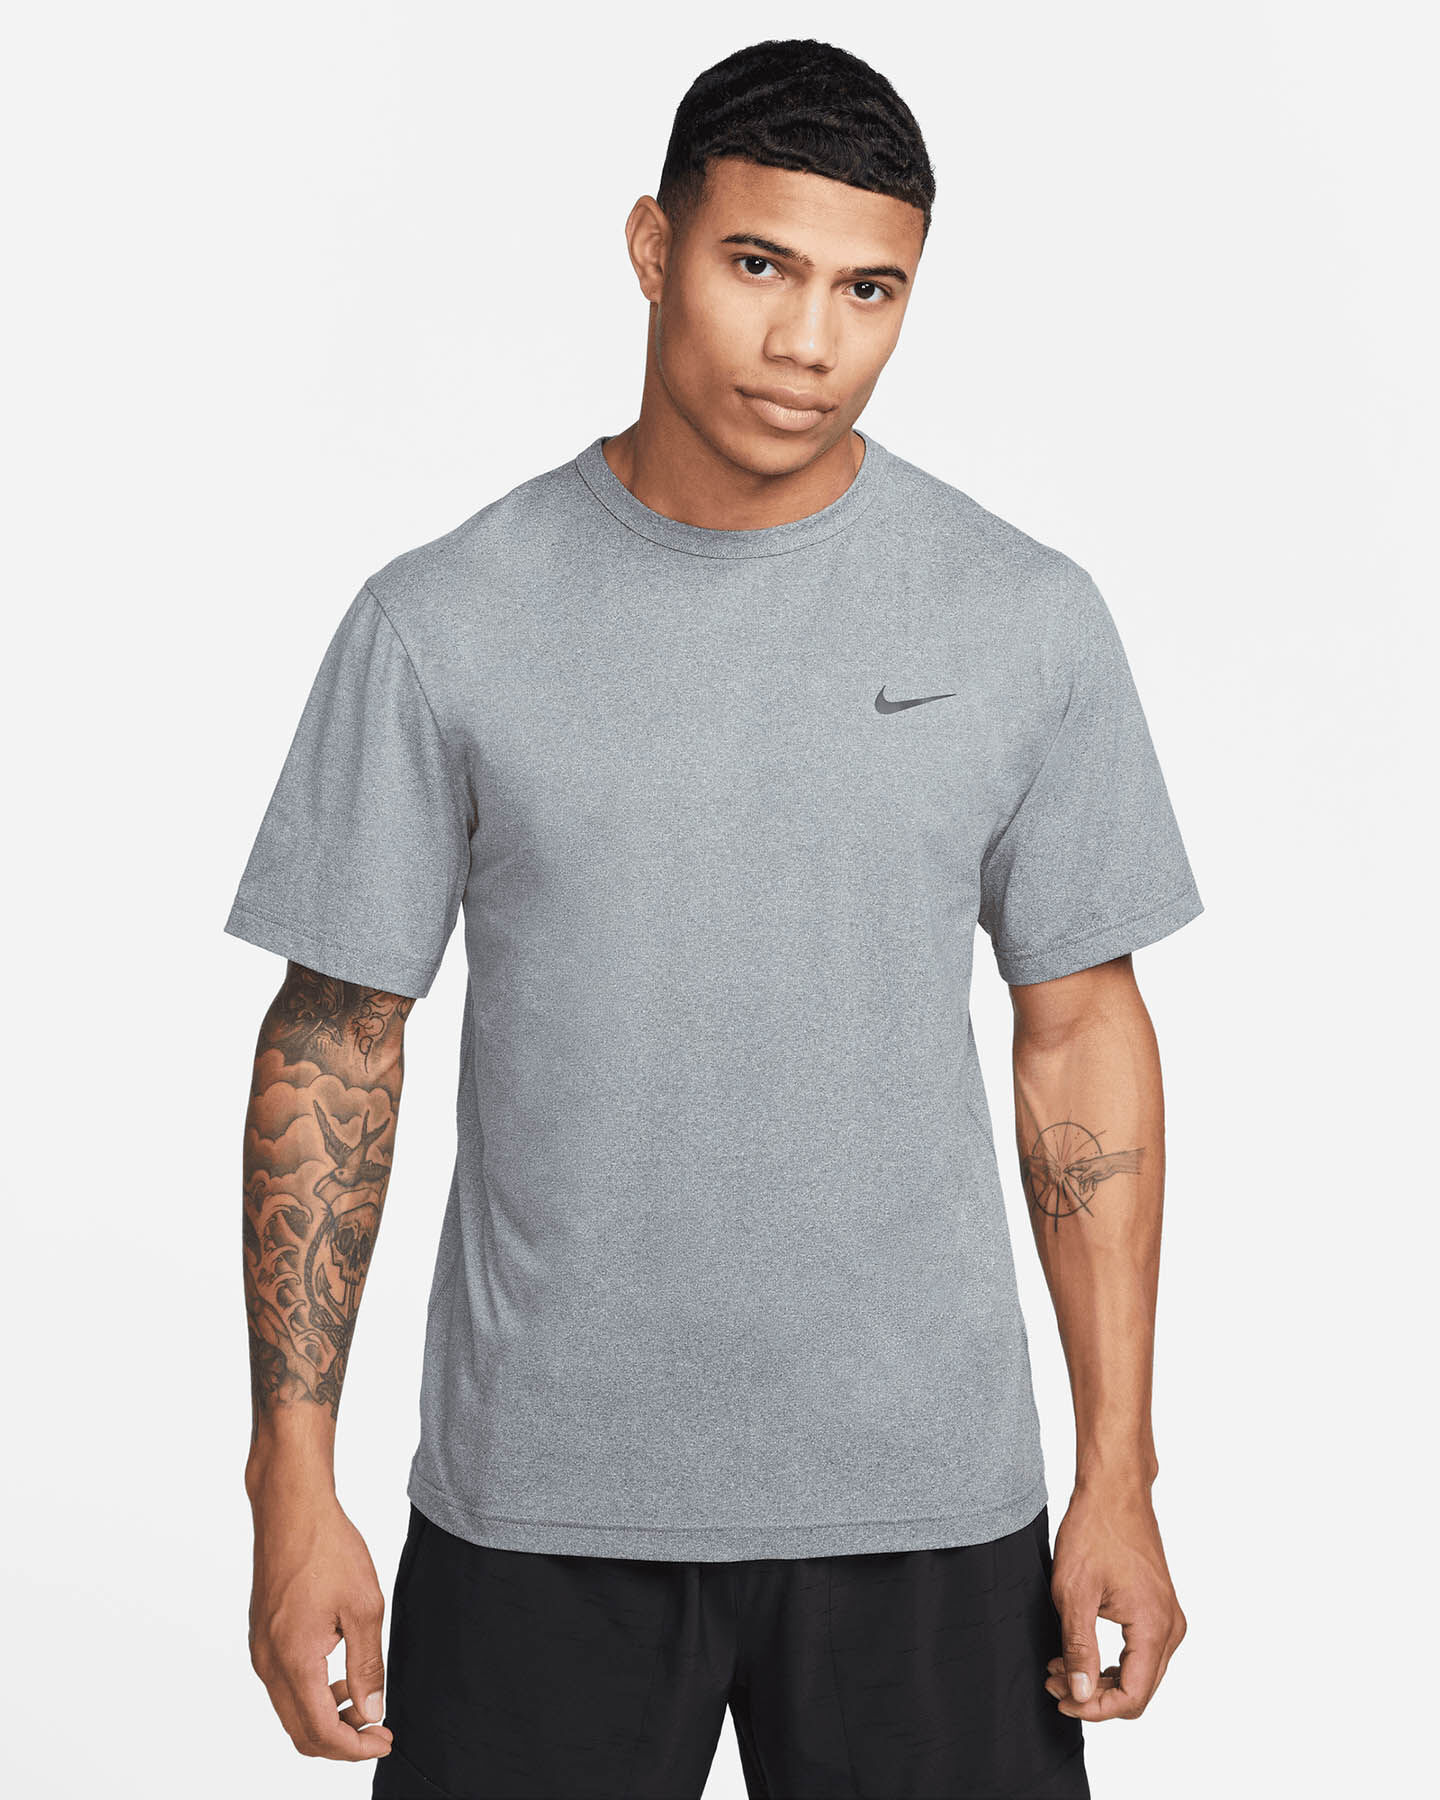  T-Shirt training NIKE DRI FIT HYVERSE M S5538683|097|S scatto 0